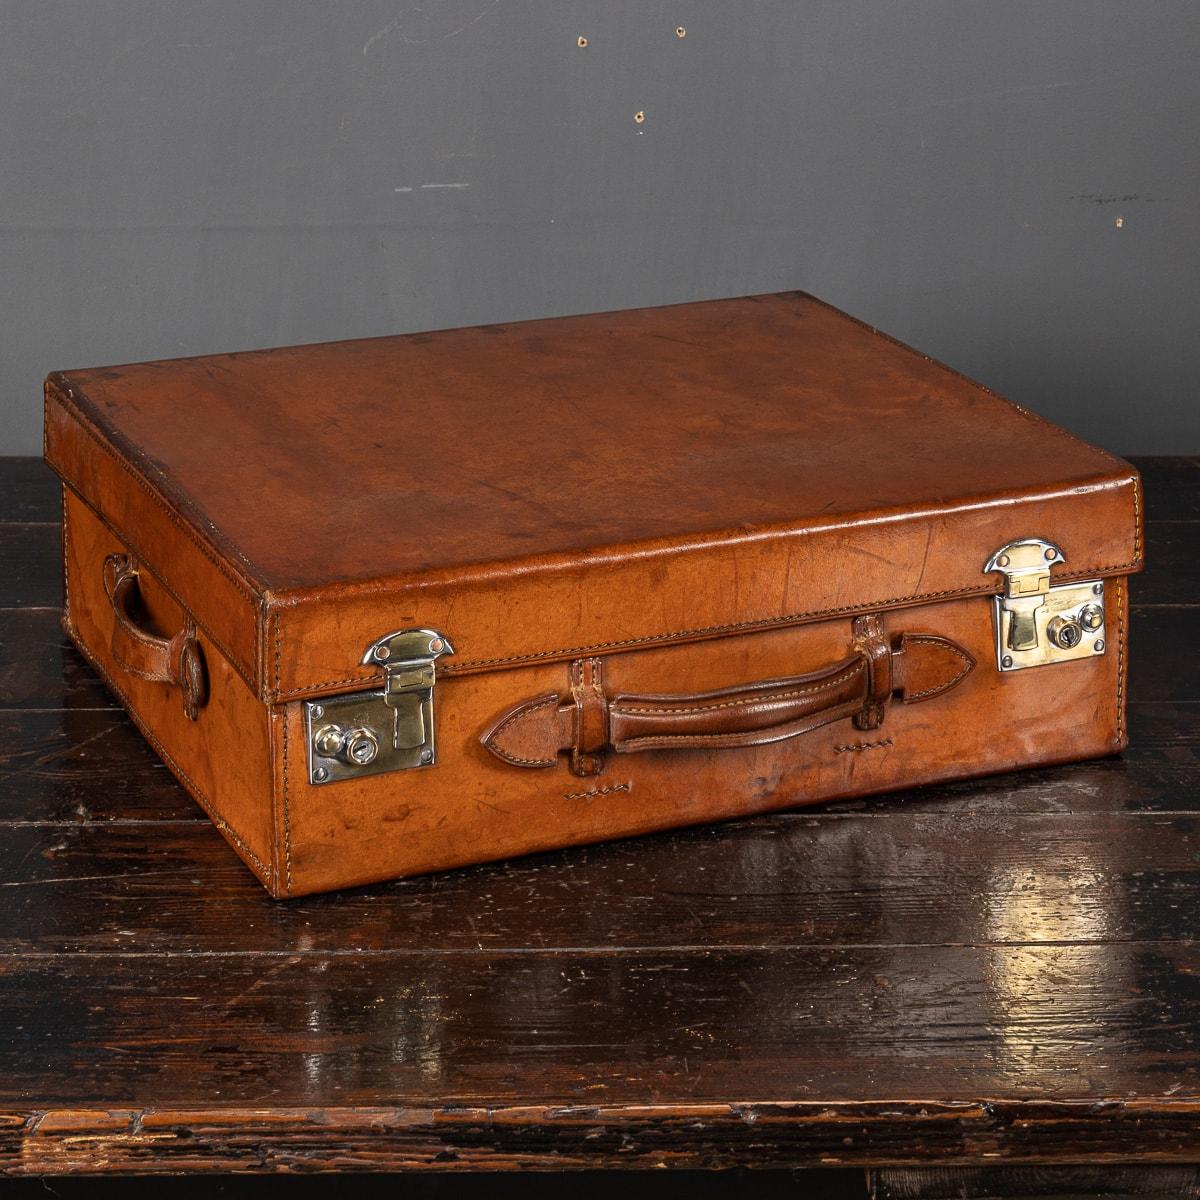 An antique early 20th Century hat trunk, lined with the original moire silk in a champagne colour with straps to keep hats in place. This trunk comes with original polished metal locks and leather handles.

Antique bridle hat trunks, reminiscent of